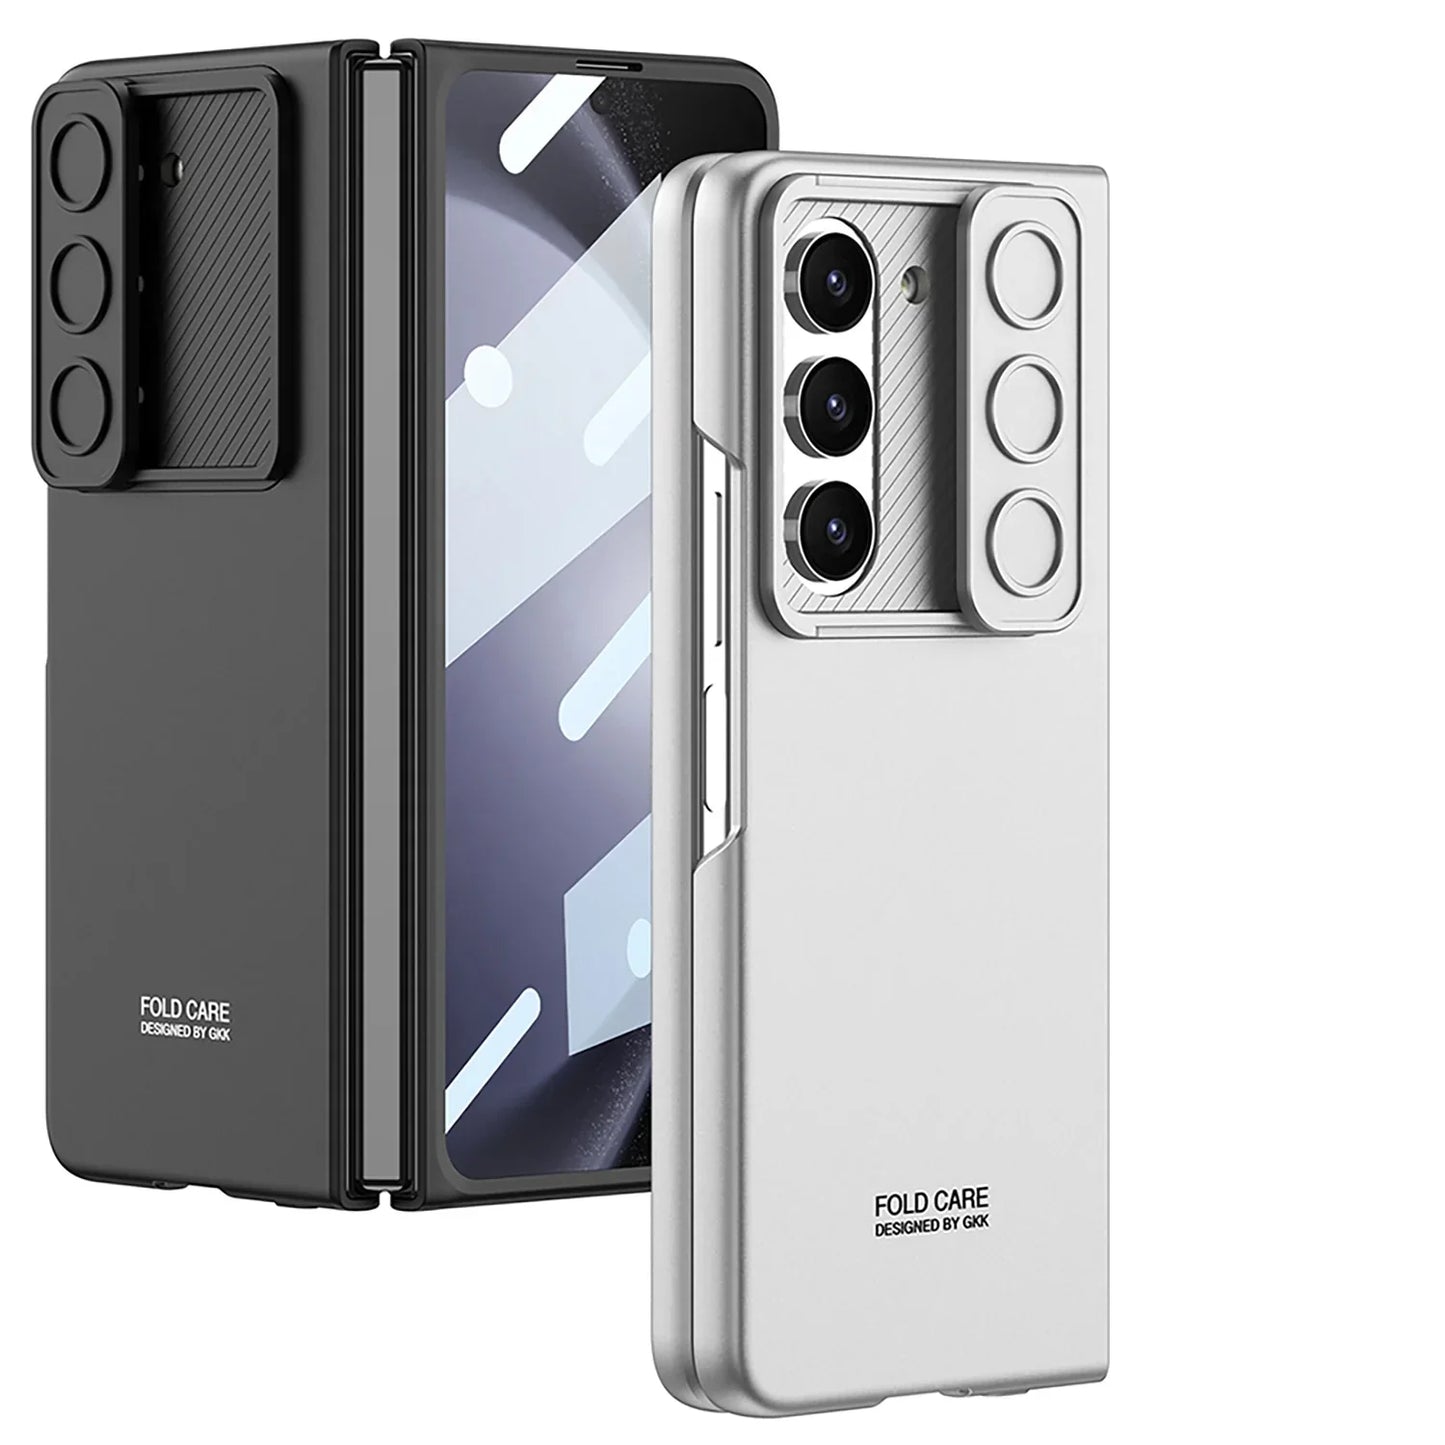 Slim Shockproof Case With Slide Camera Protector For Galaxy Z Fold 5